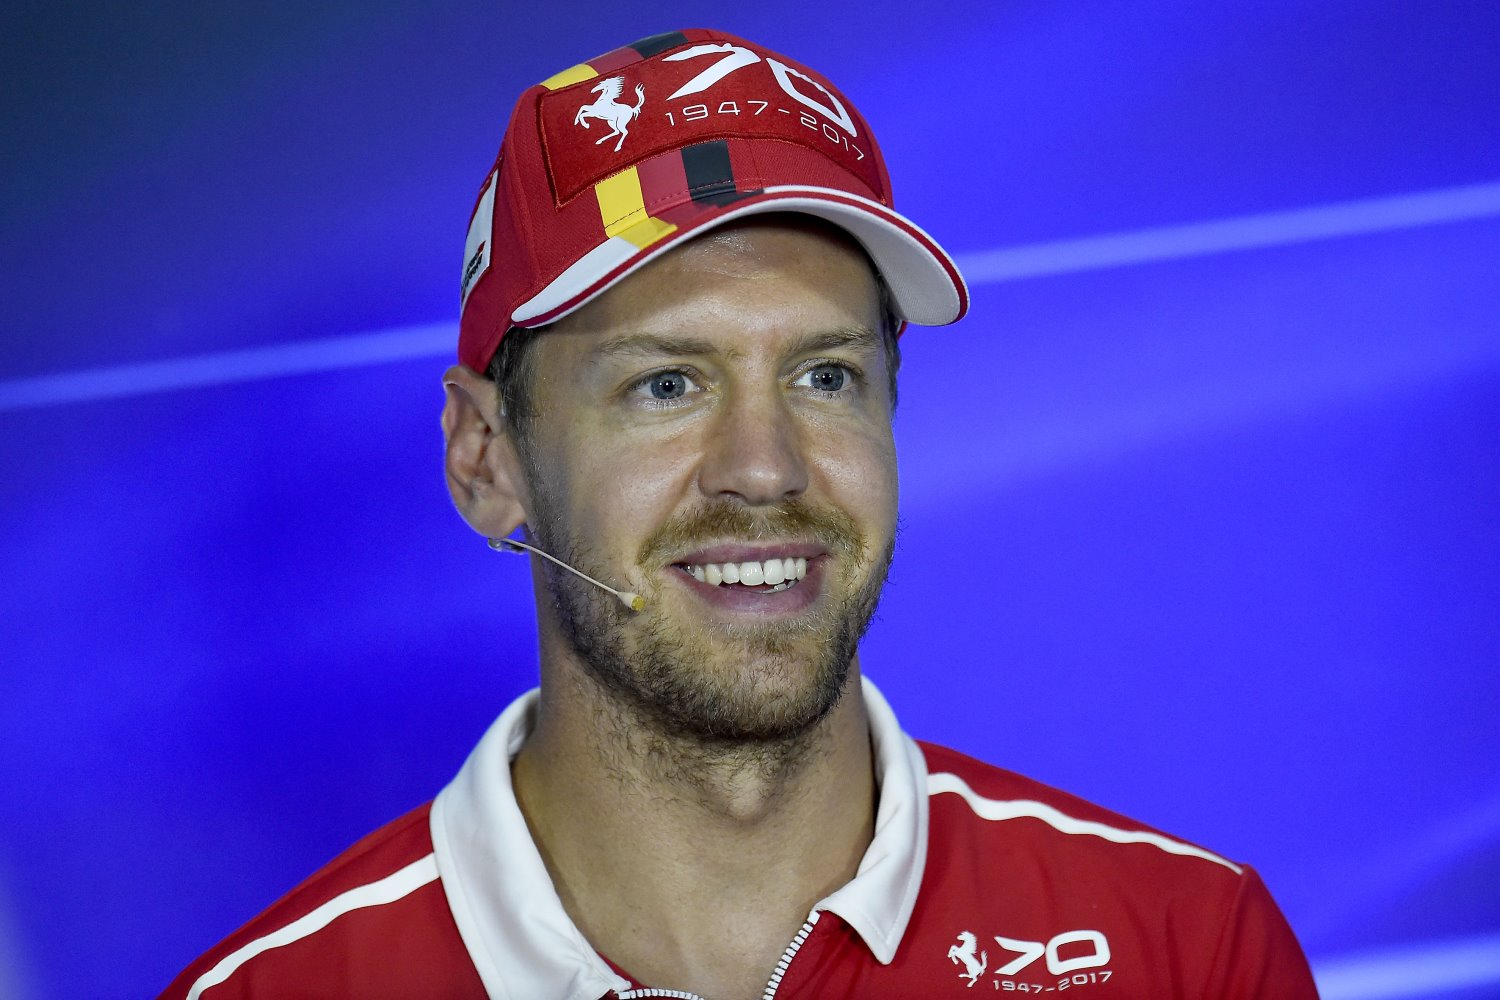 After Monza the stark reality has set in for Vettel - he knows his Ferrari cannot beat the Aldo Costa designed Mercedes